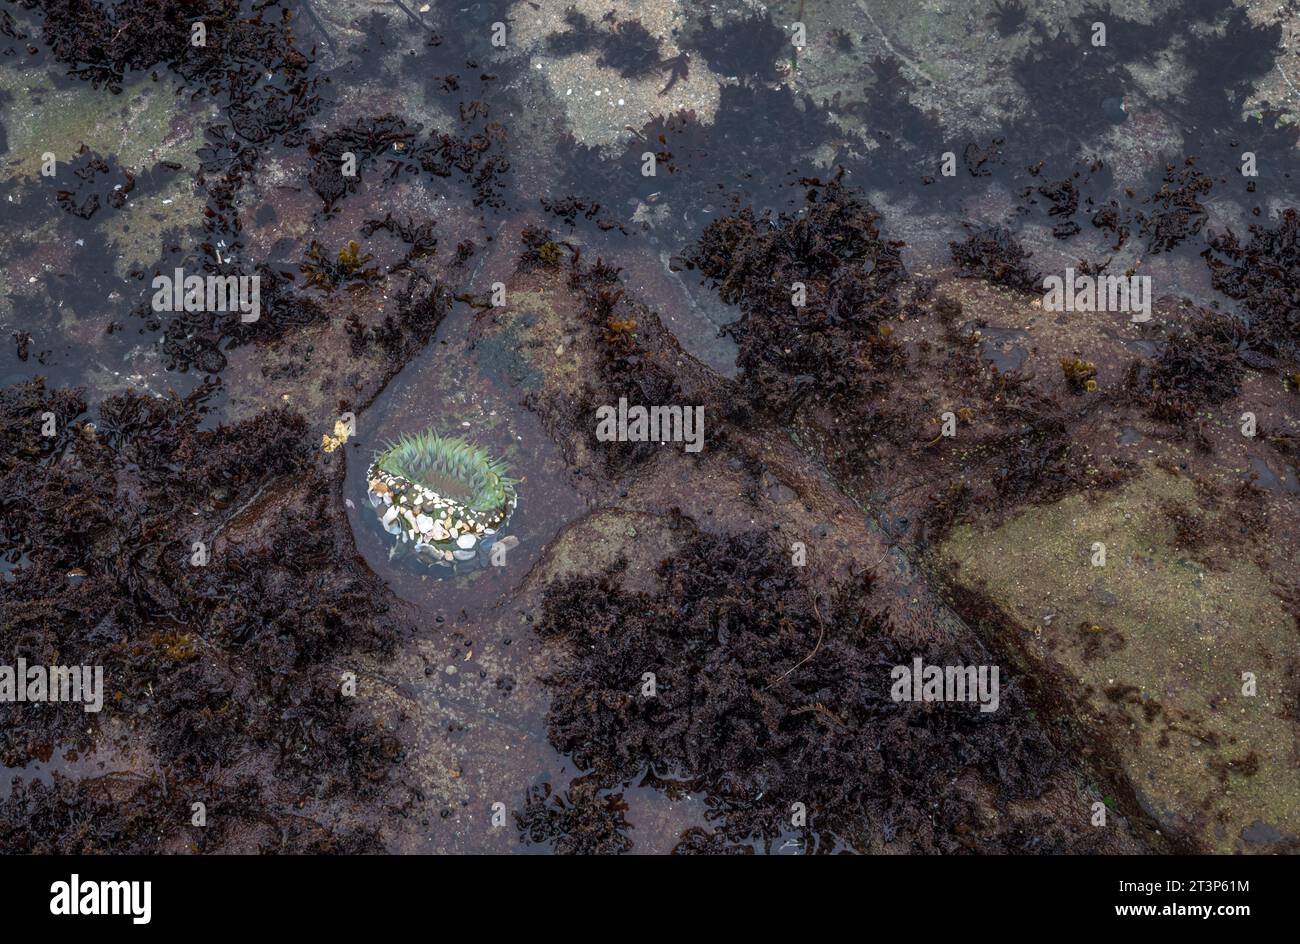 A tide pool with a green aggregating anemone Stock Photo